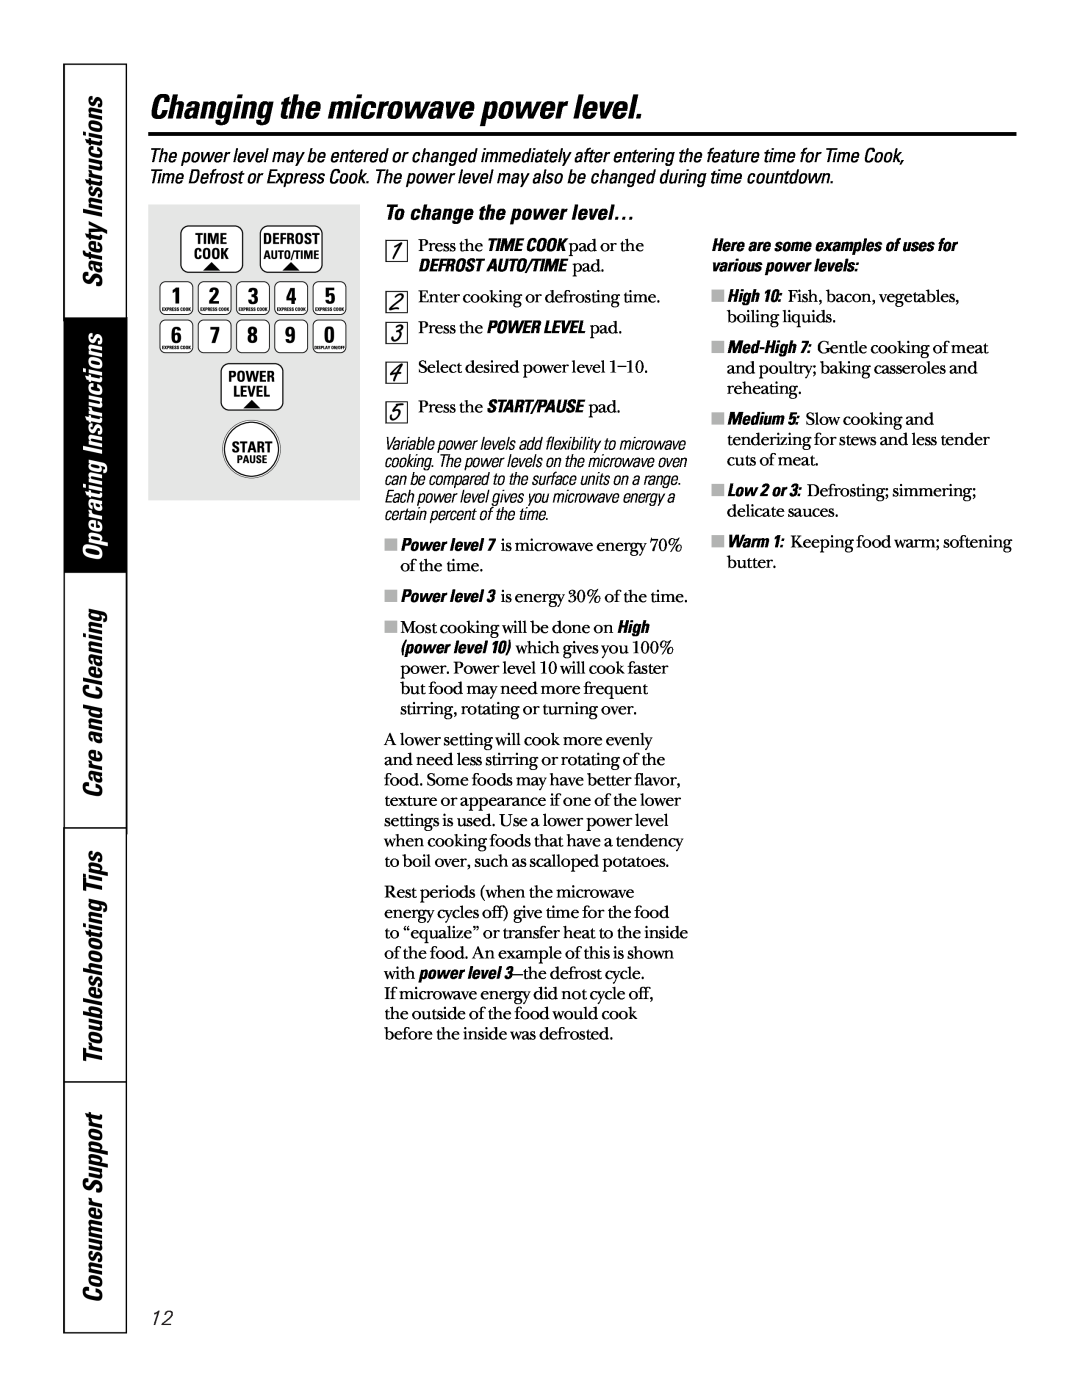 GE JTP95 owner manual Changing the microwave power level, Instructions, To change the power level…, DEFROST AUTO/TIME pad 